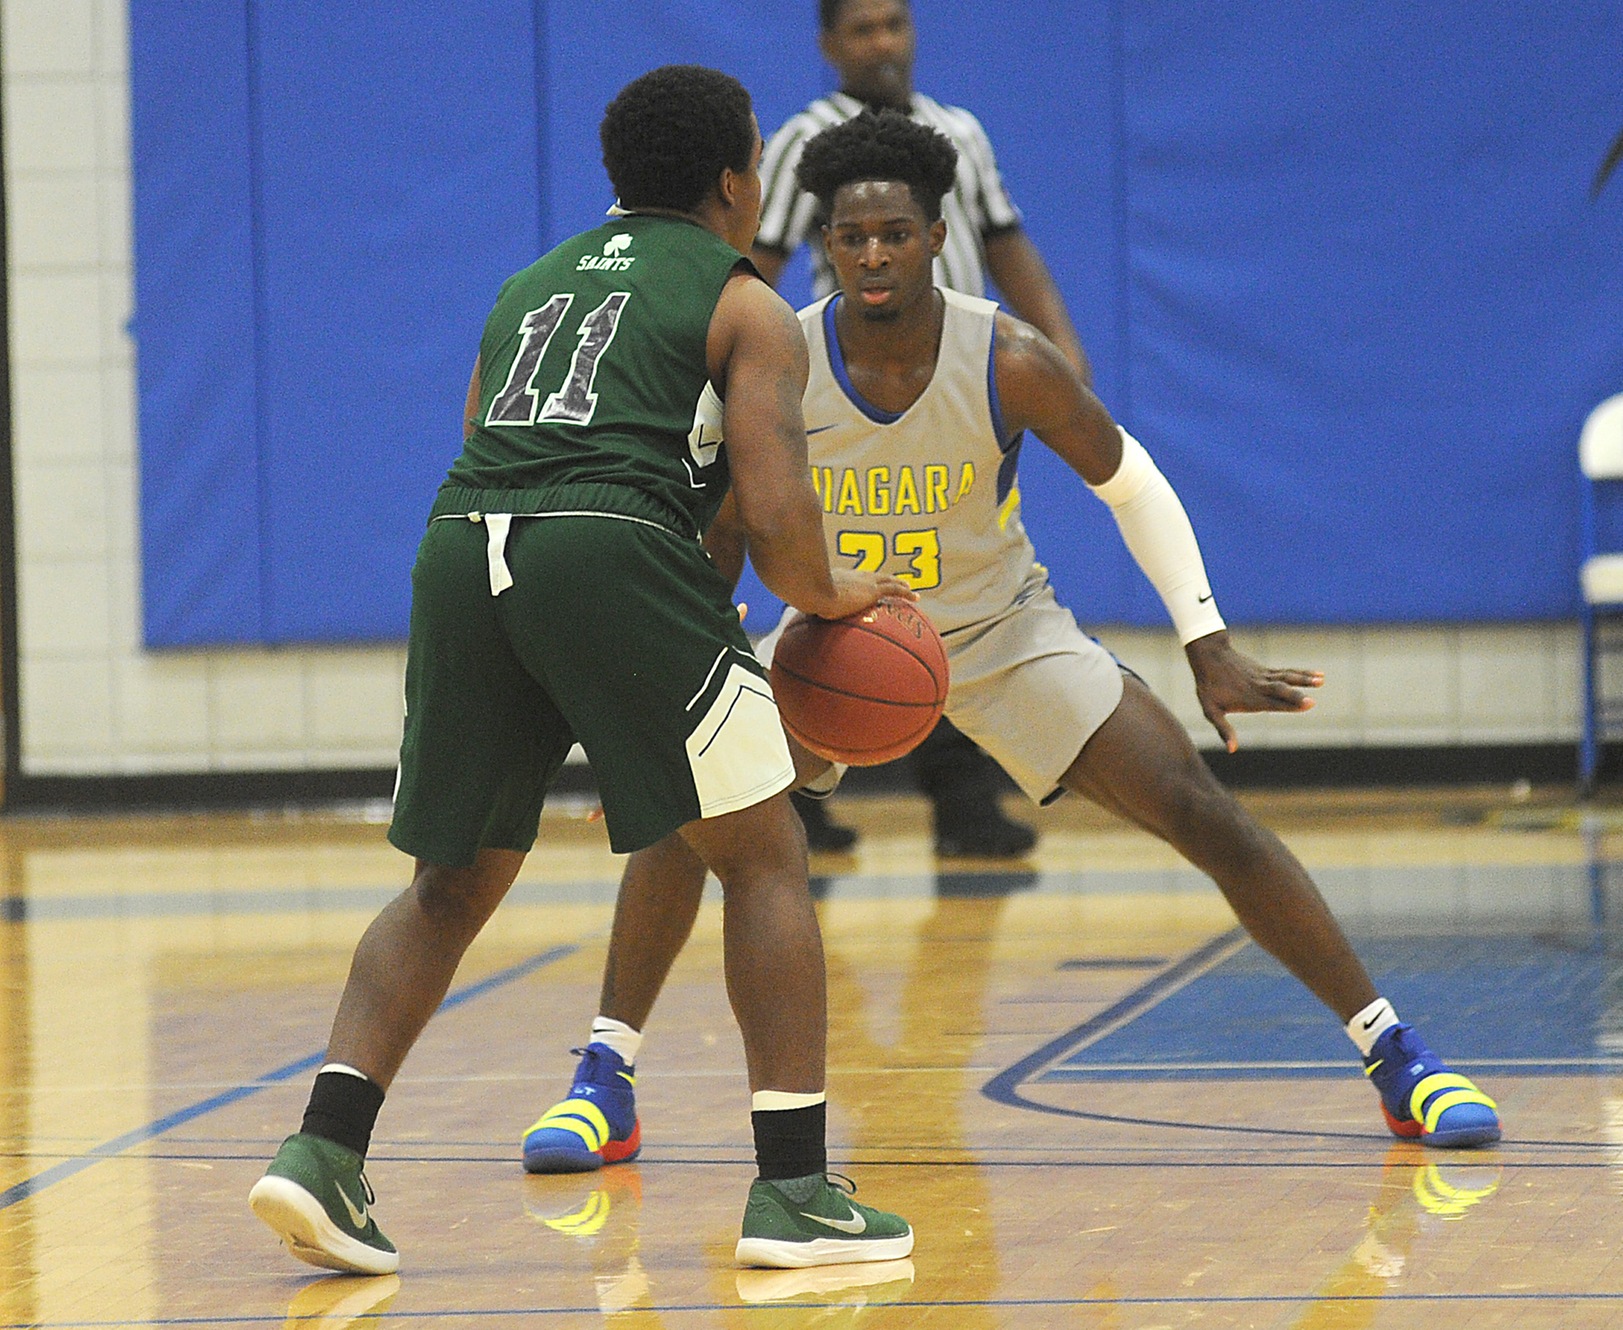 NCCC topped late by Cougars